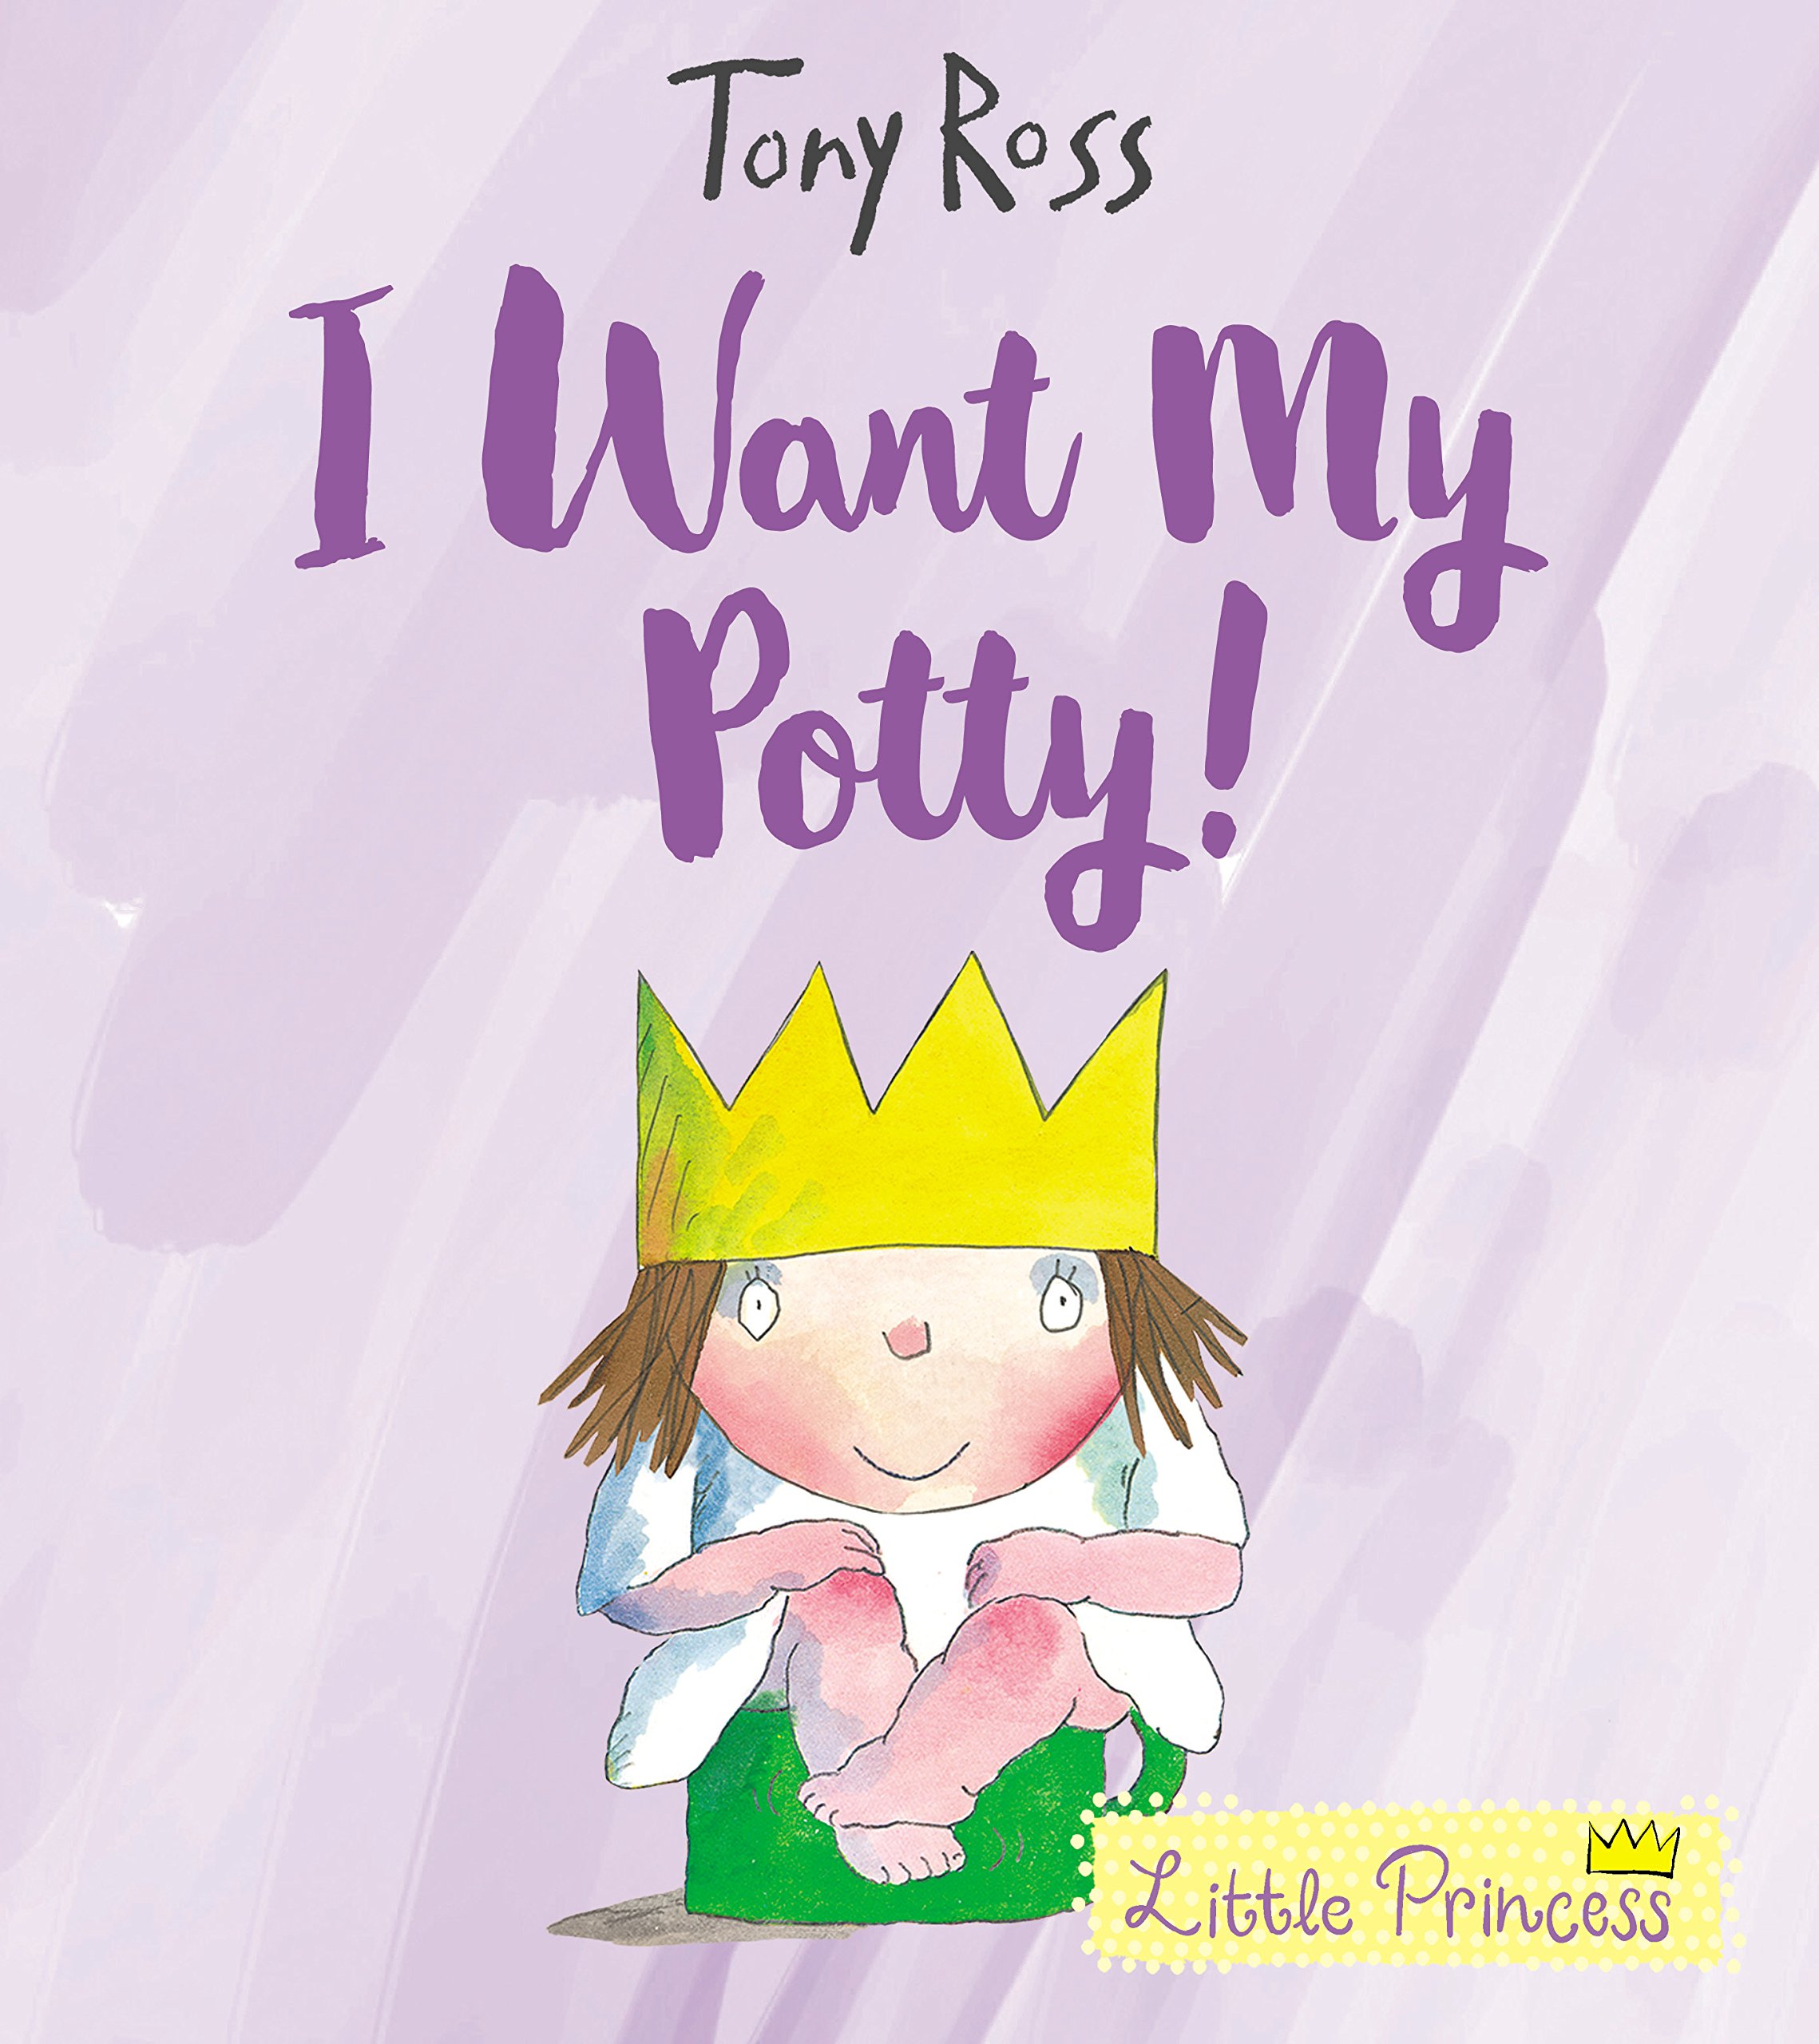 front cover of a potty training book titled 'i want my potty!'.